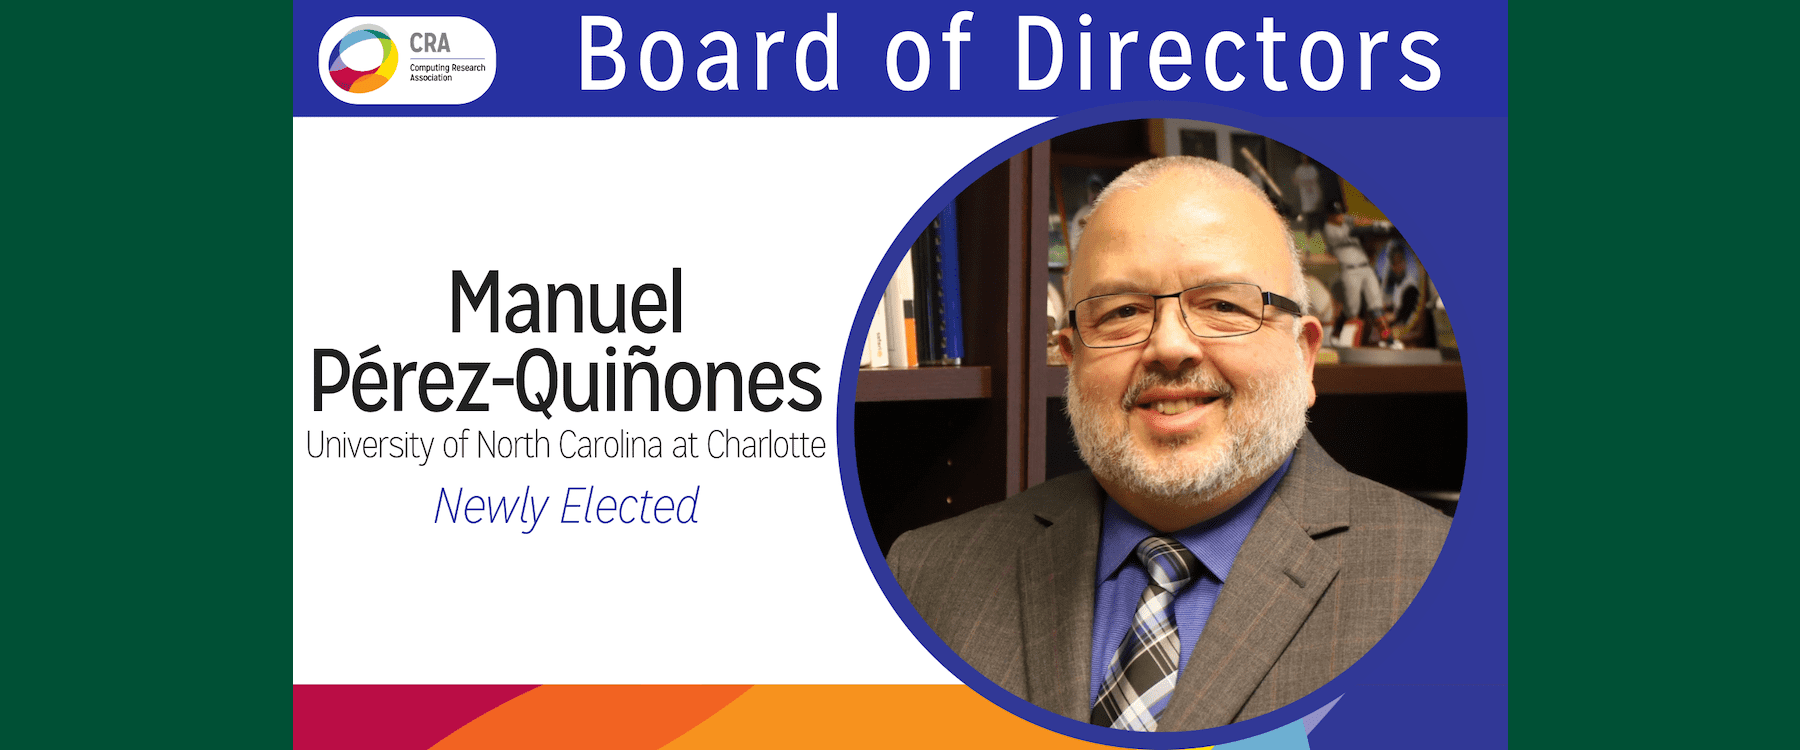 Manuel Pérez Quiñones, Professor in the Department of Software and Information Systems in the College of Computing and Informatics, has been elected to the Board of Directors of the Computing Research Association, one of the nation’s most influential computing research and policy nonprofit organizations.